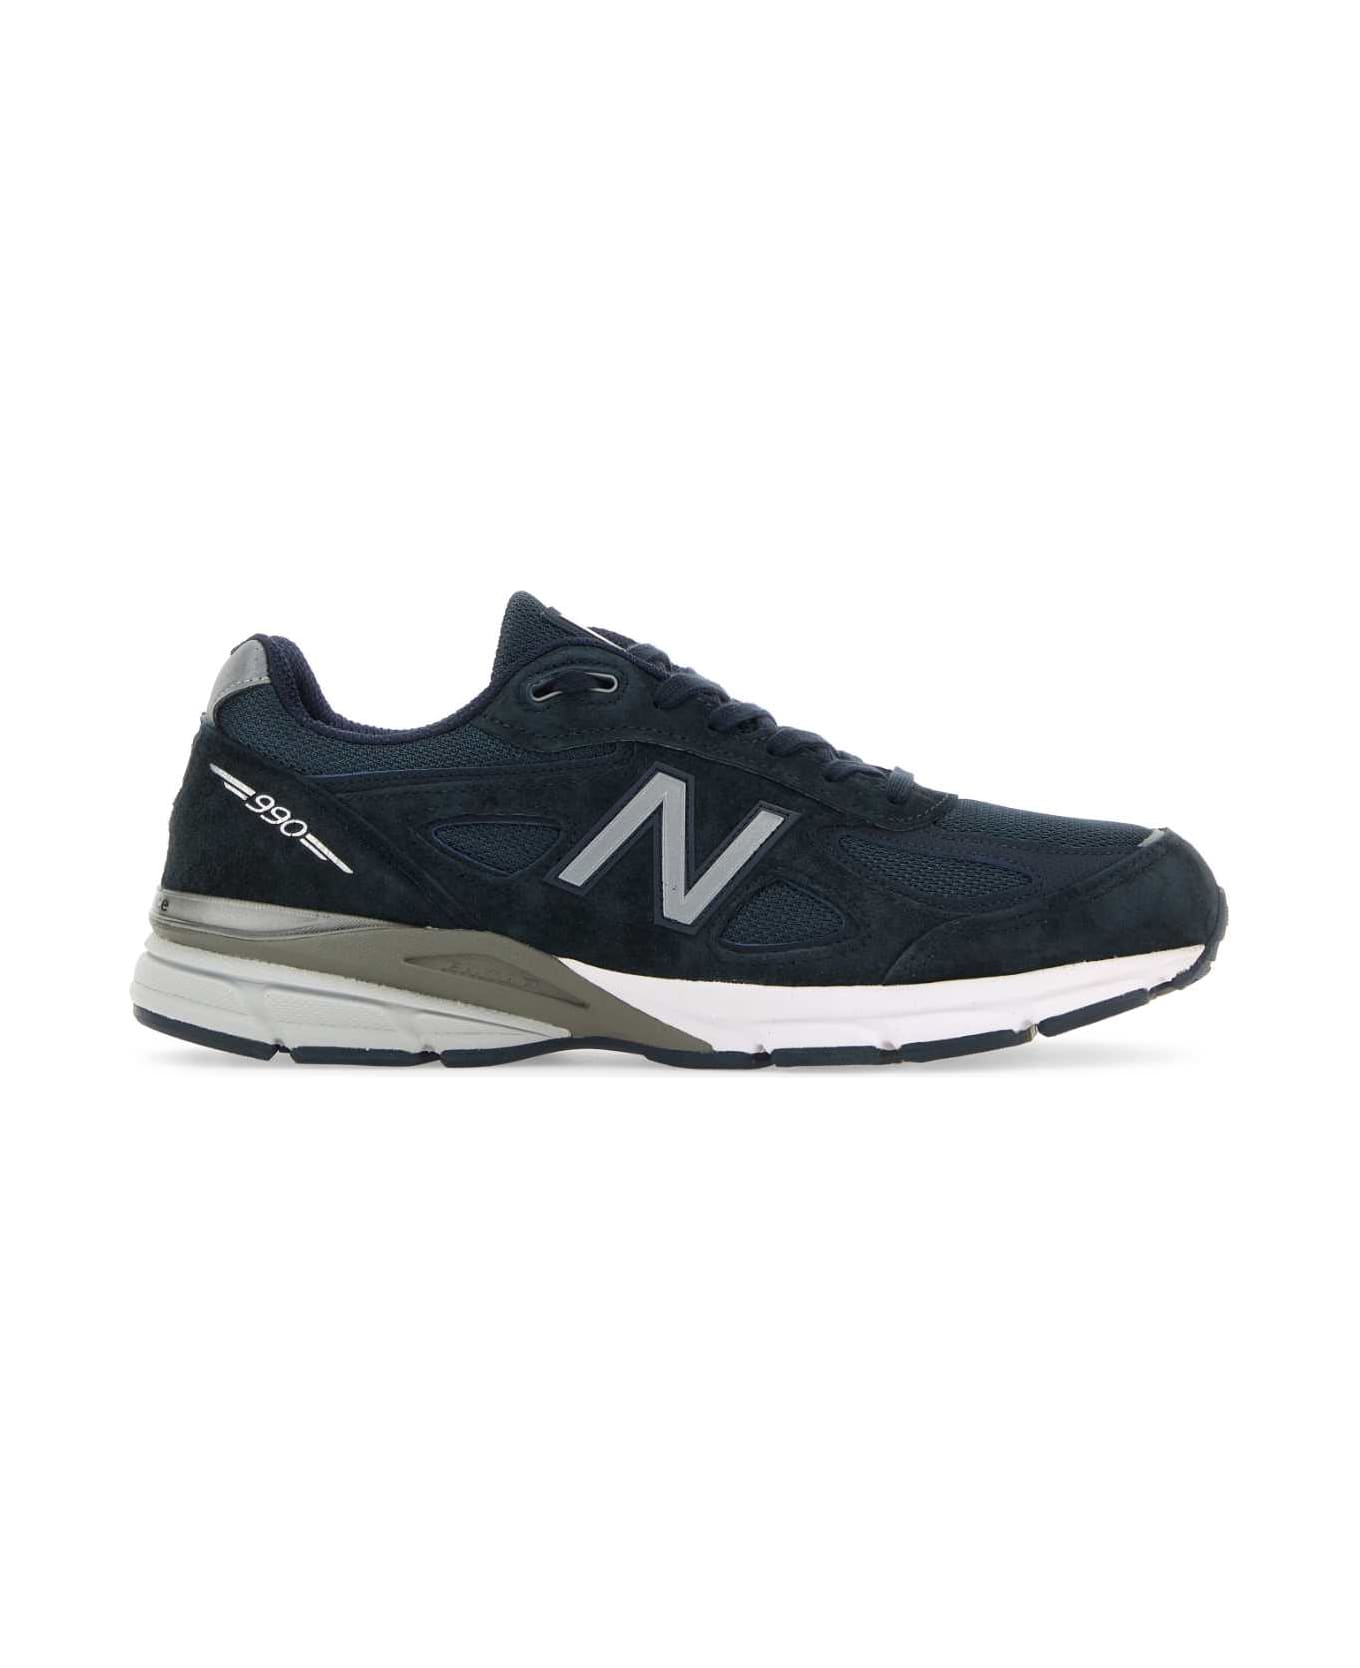 New Balance Blue Fabric And Suede 990v4 Sneakers - NAVY スニーカー